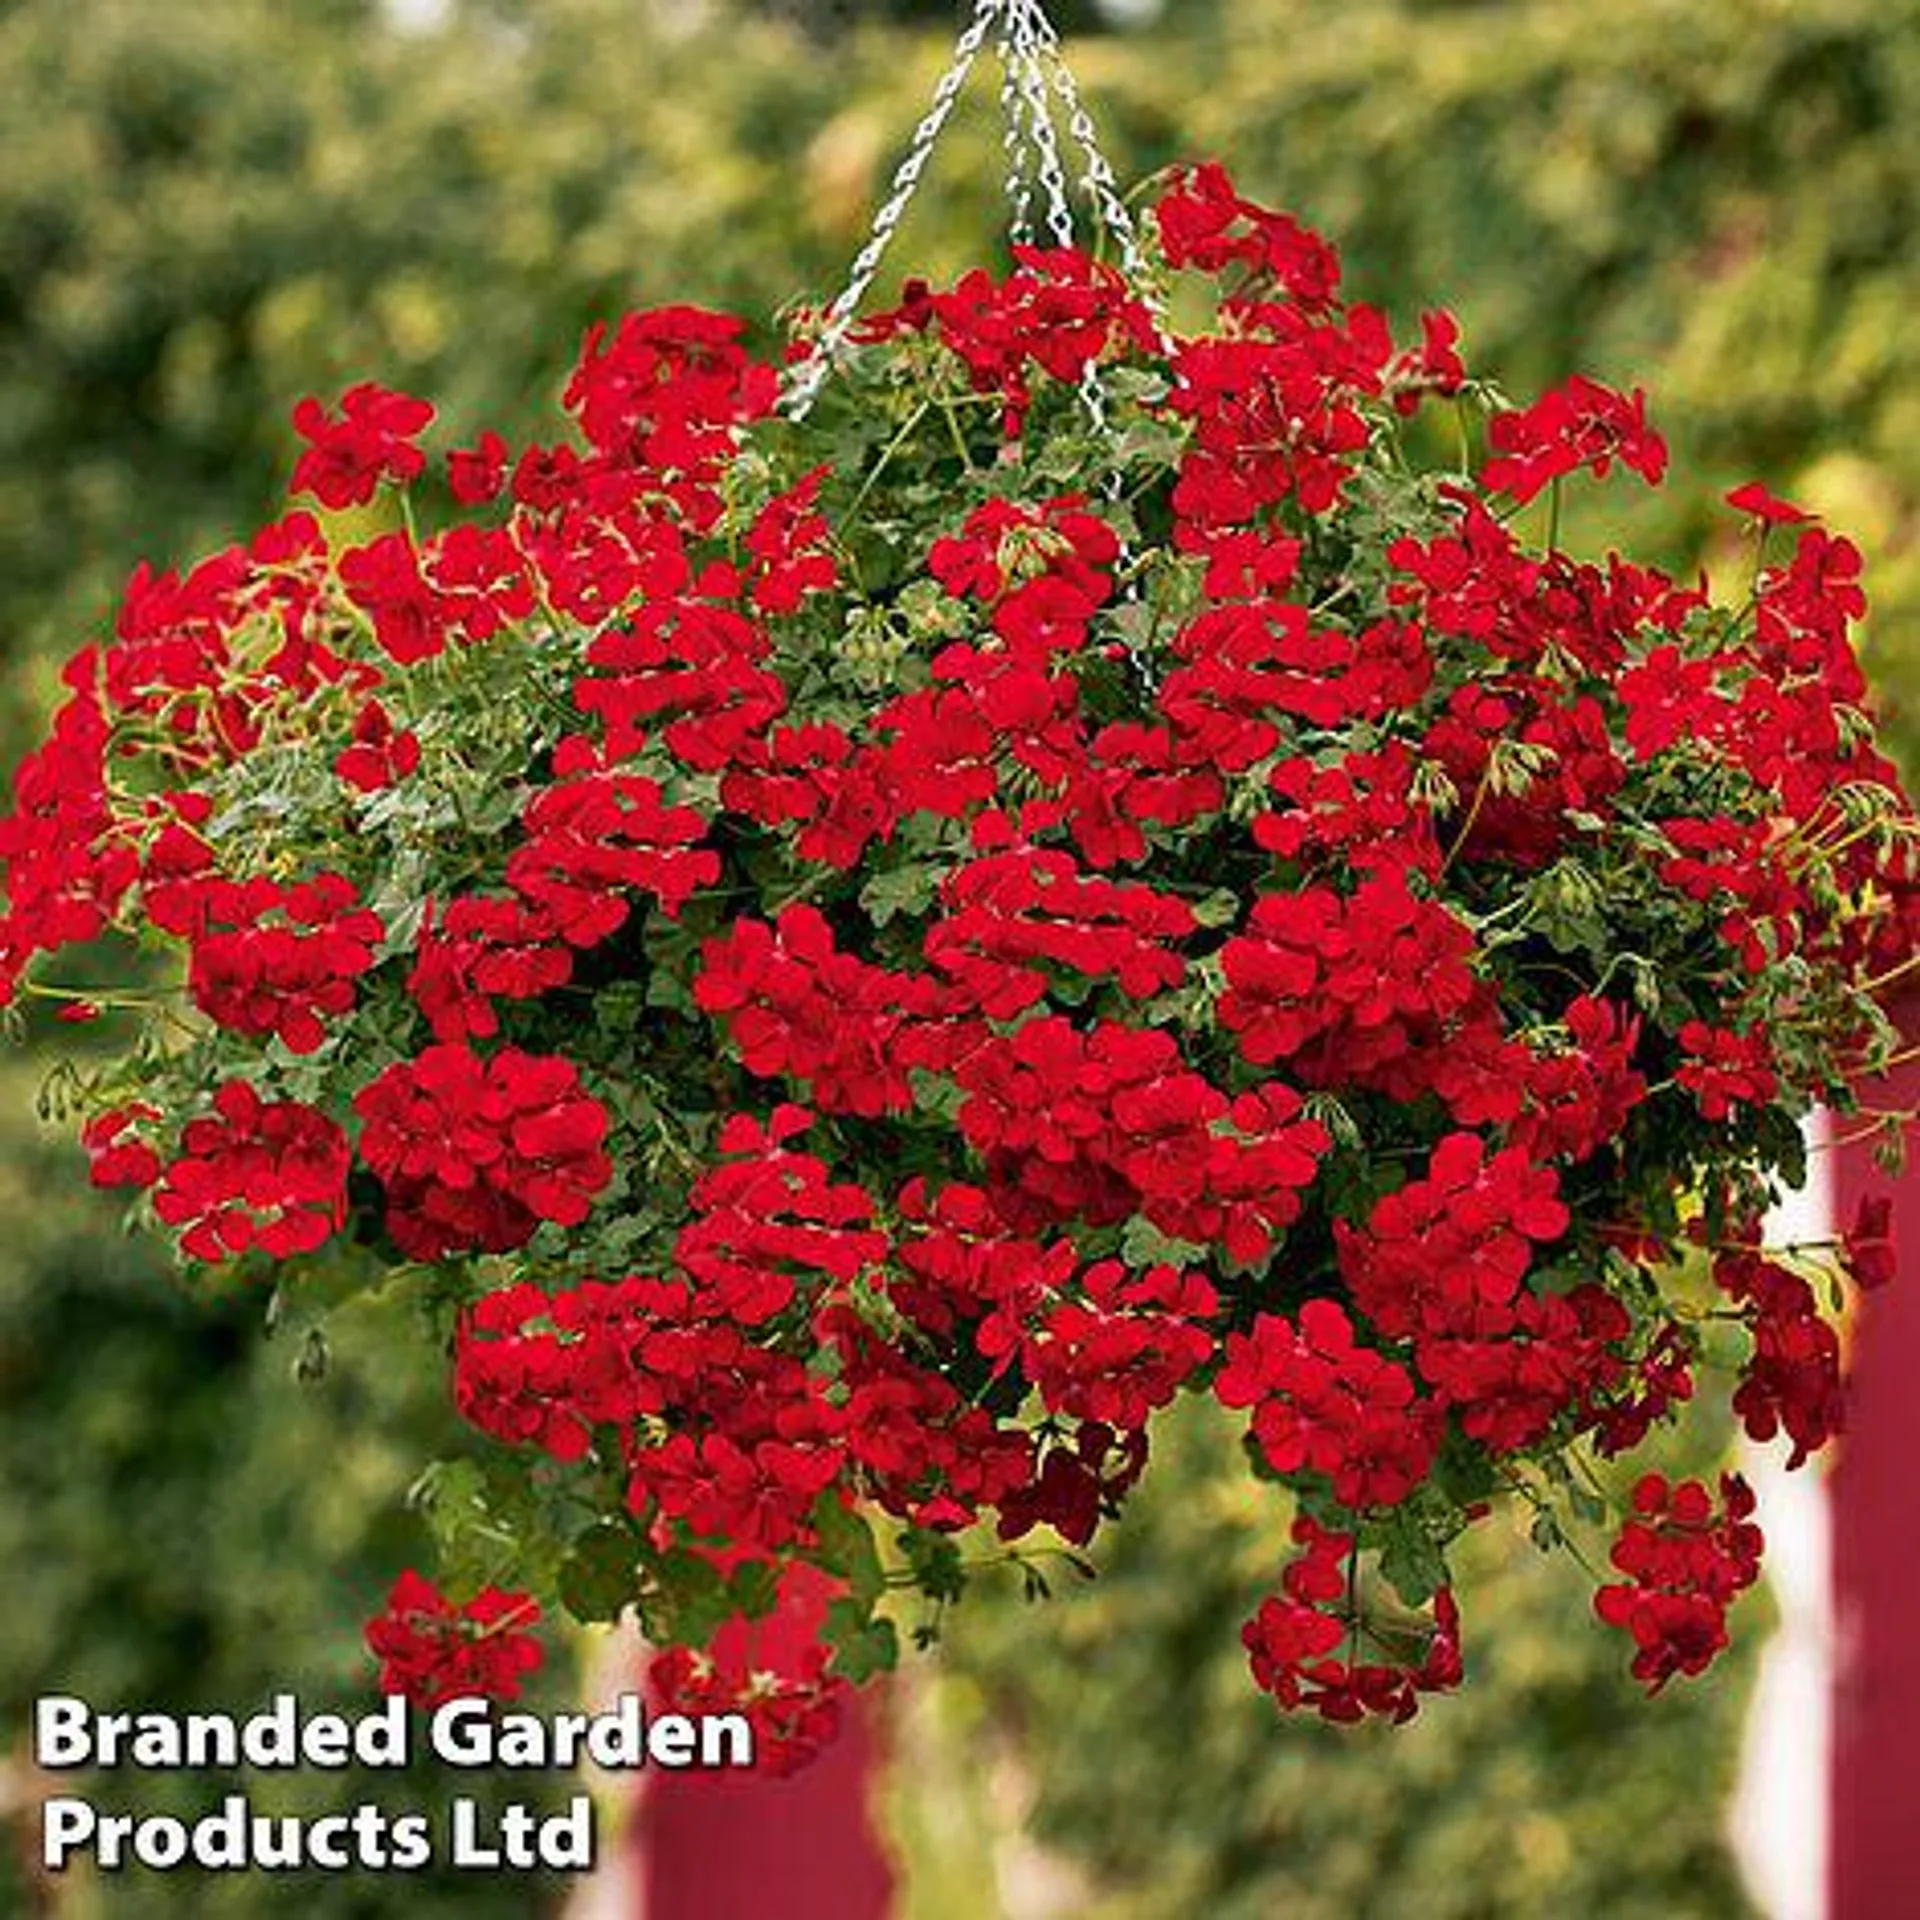 Buy two 35cm Pre-Planted Baskets ONLY £44.99